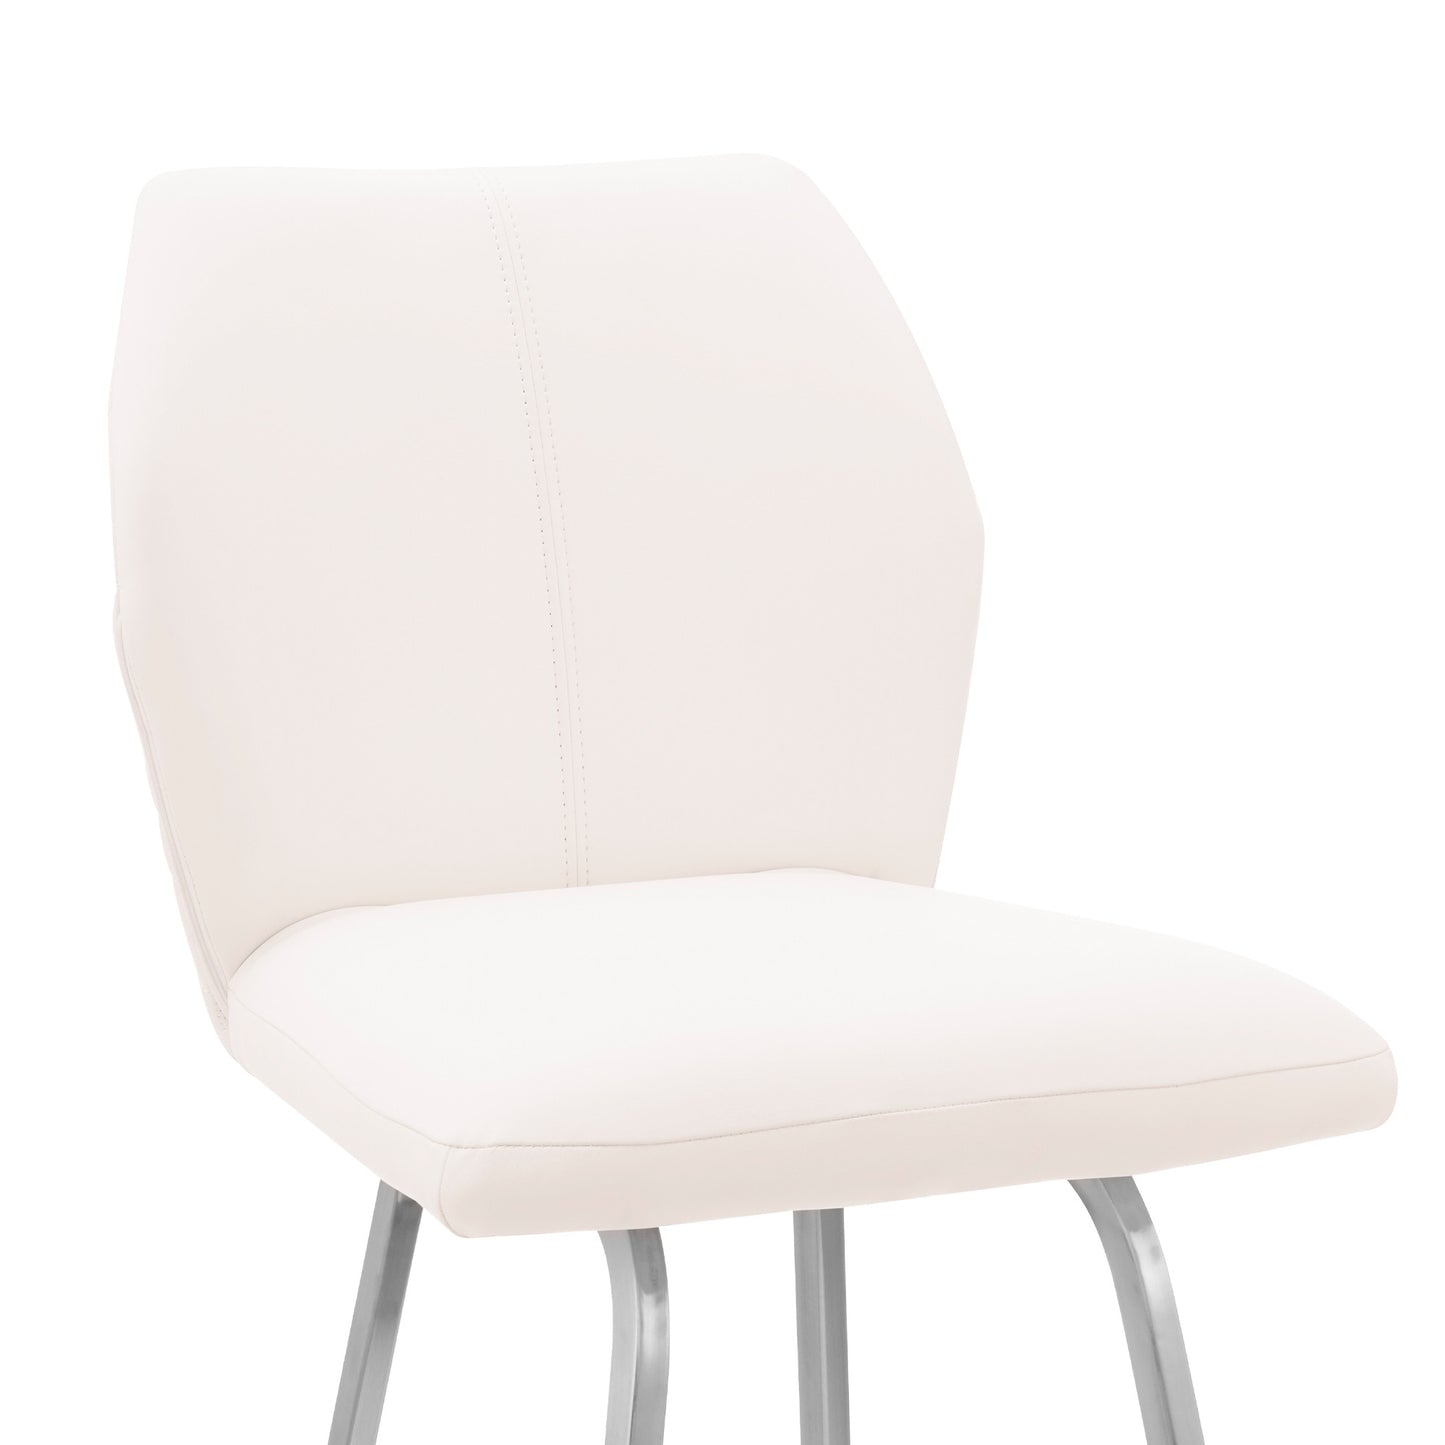 42" White Faux Leather And Iron Bar Height Chair